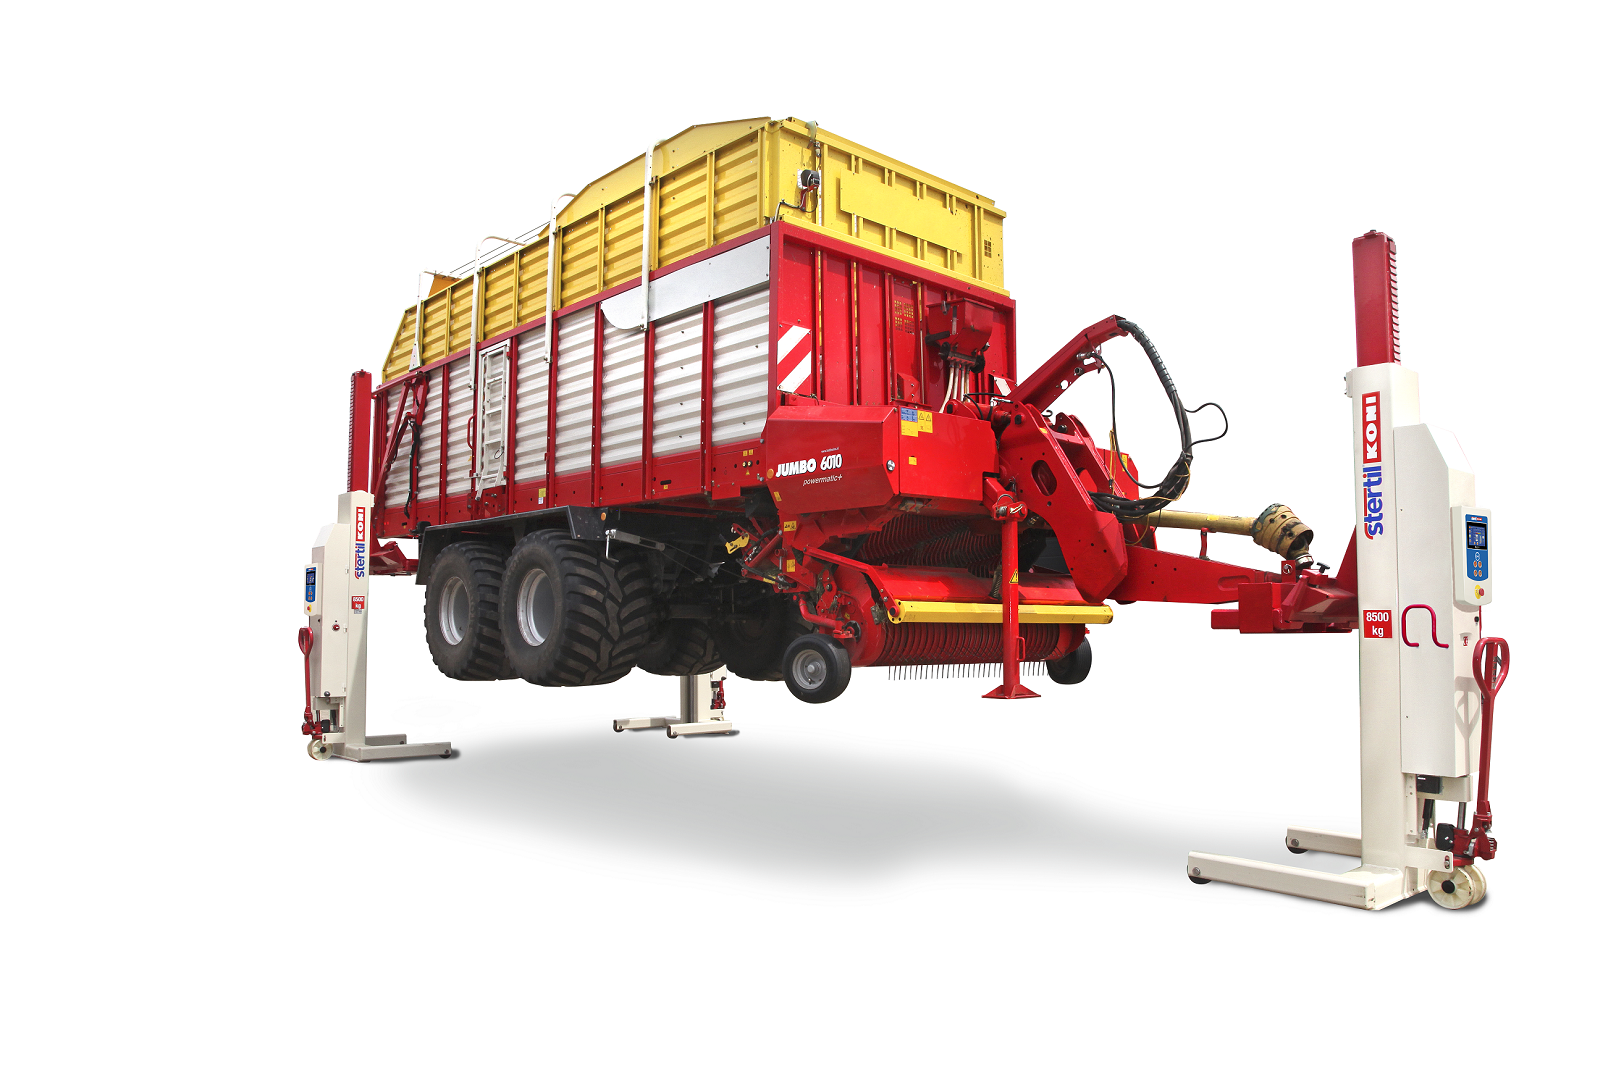 The agricultural multipurpose adapter is suitable for lifting tractors with two or three mobile columns